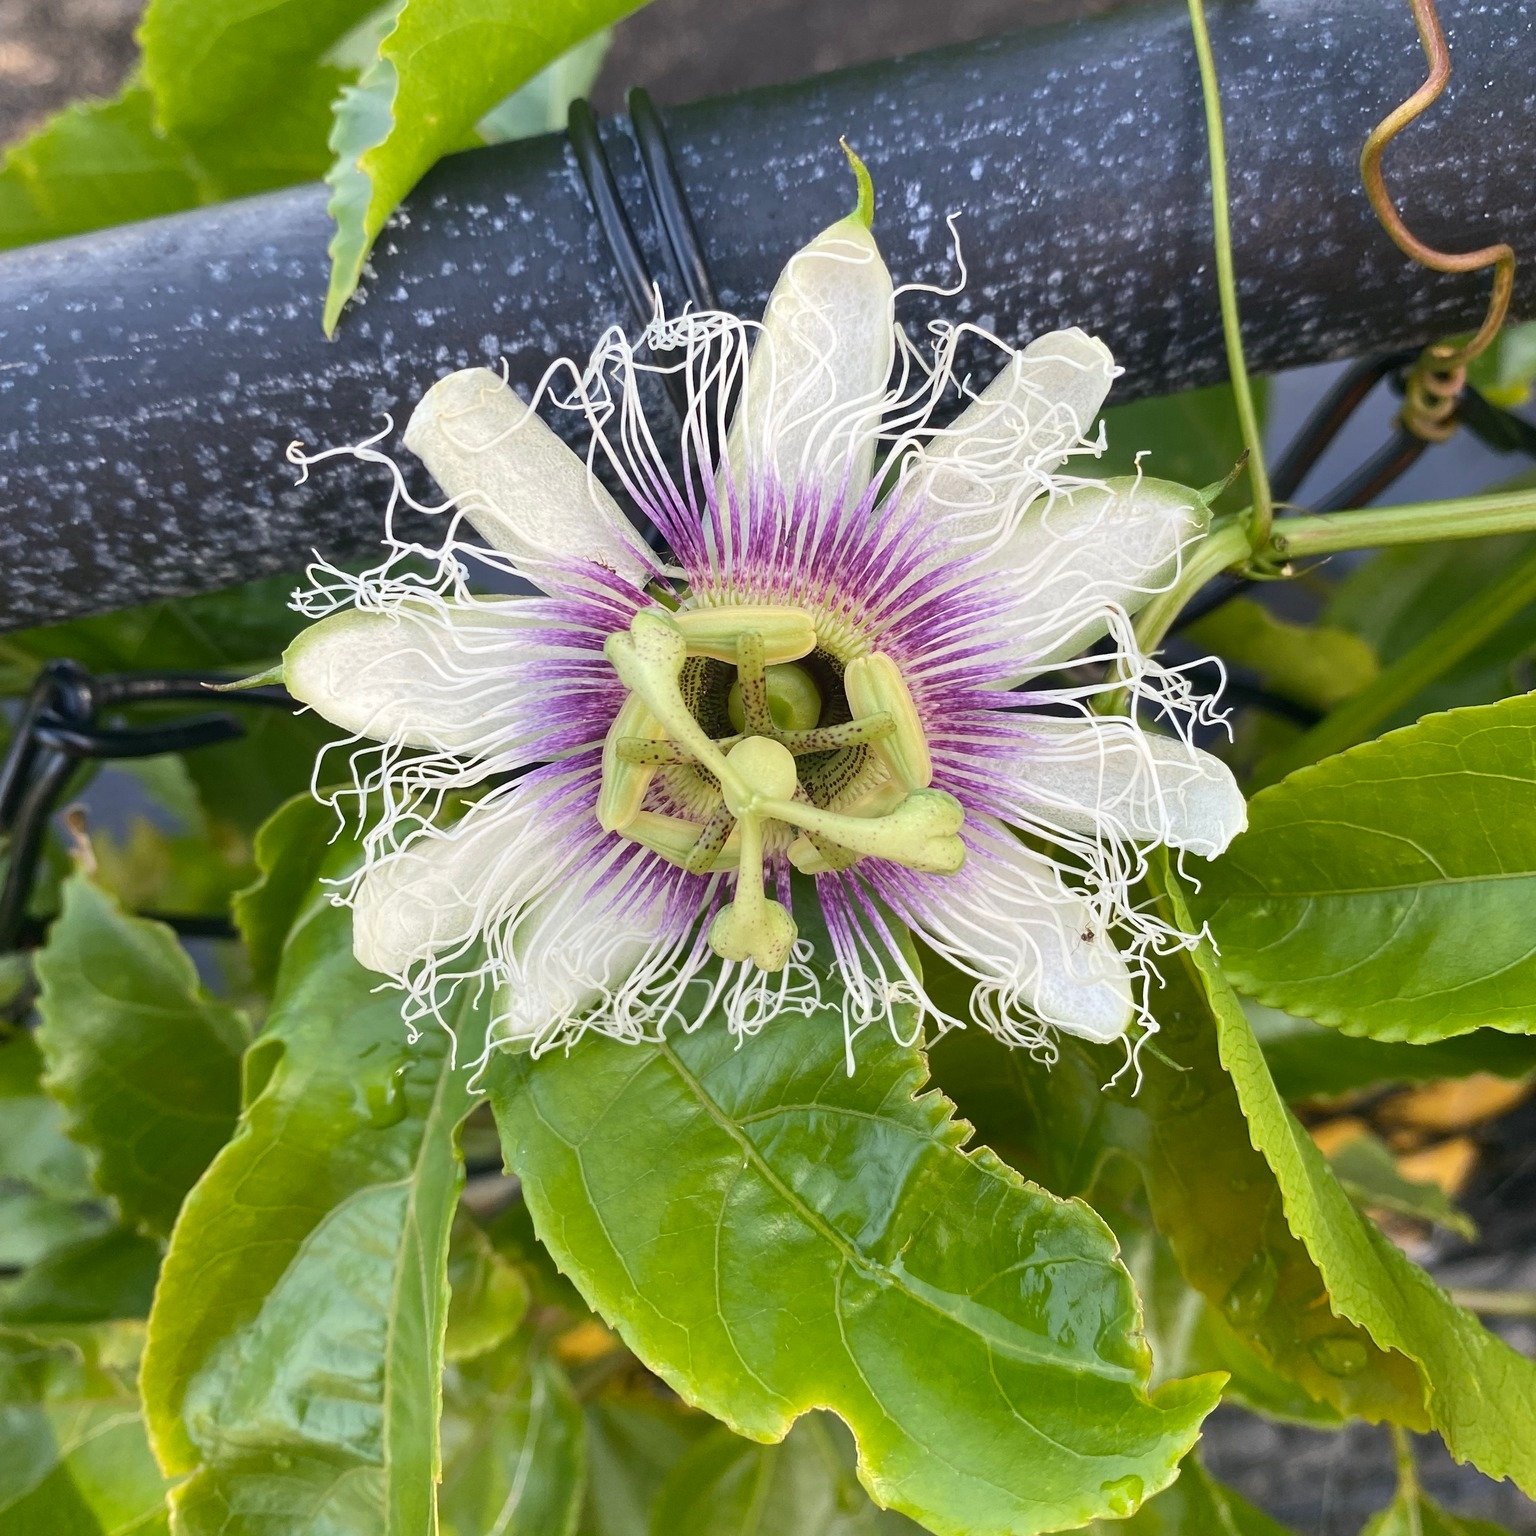 We have passionfruit flowers and we have baby fruit. Let's hope the white cockatoos don't find them this year (highly unlikely)!